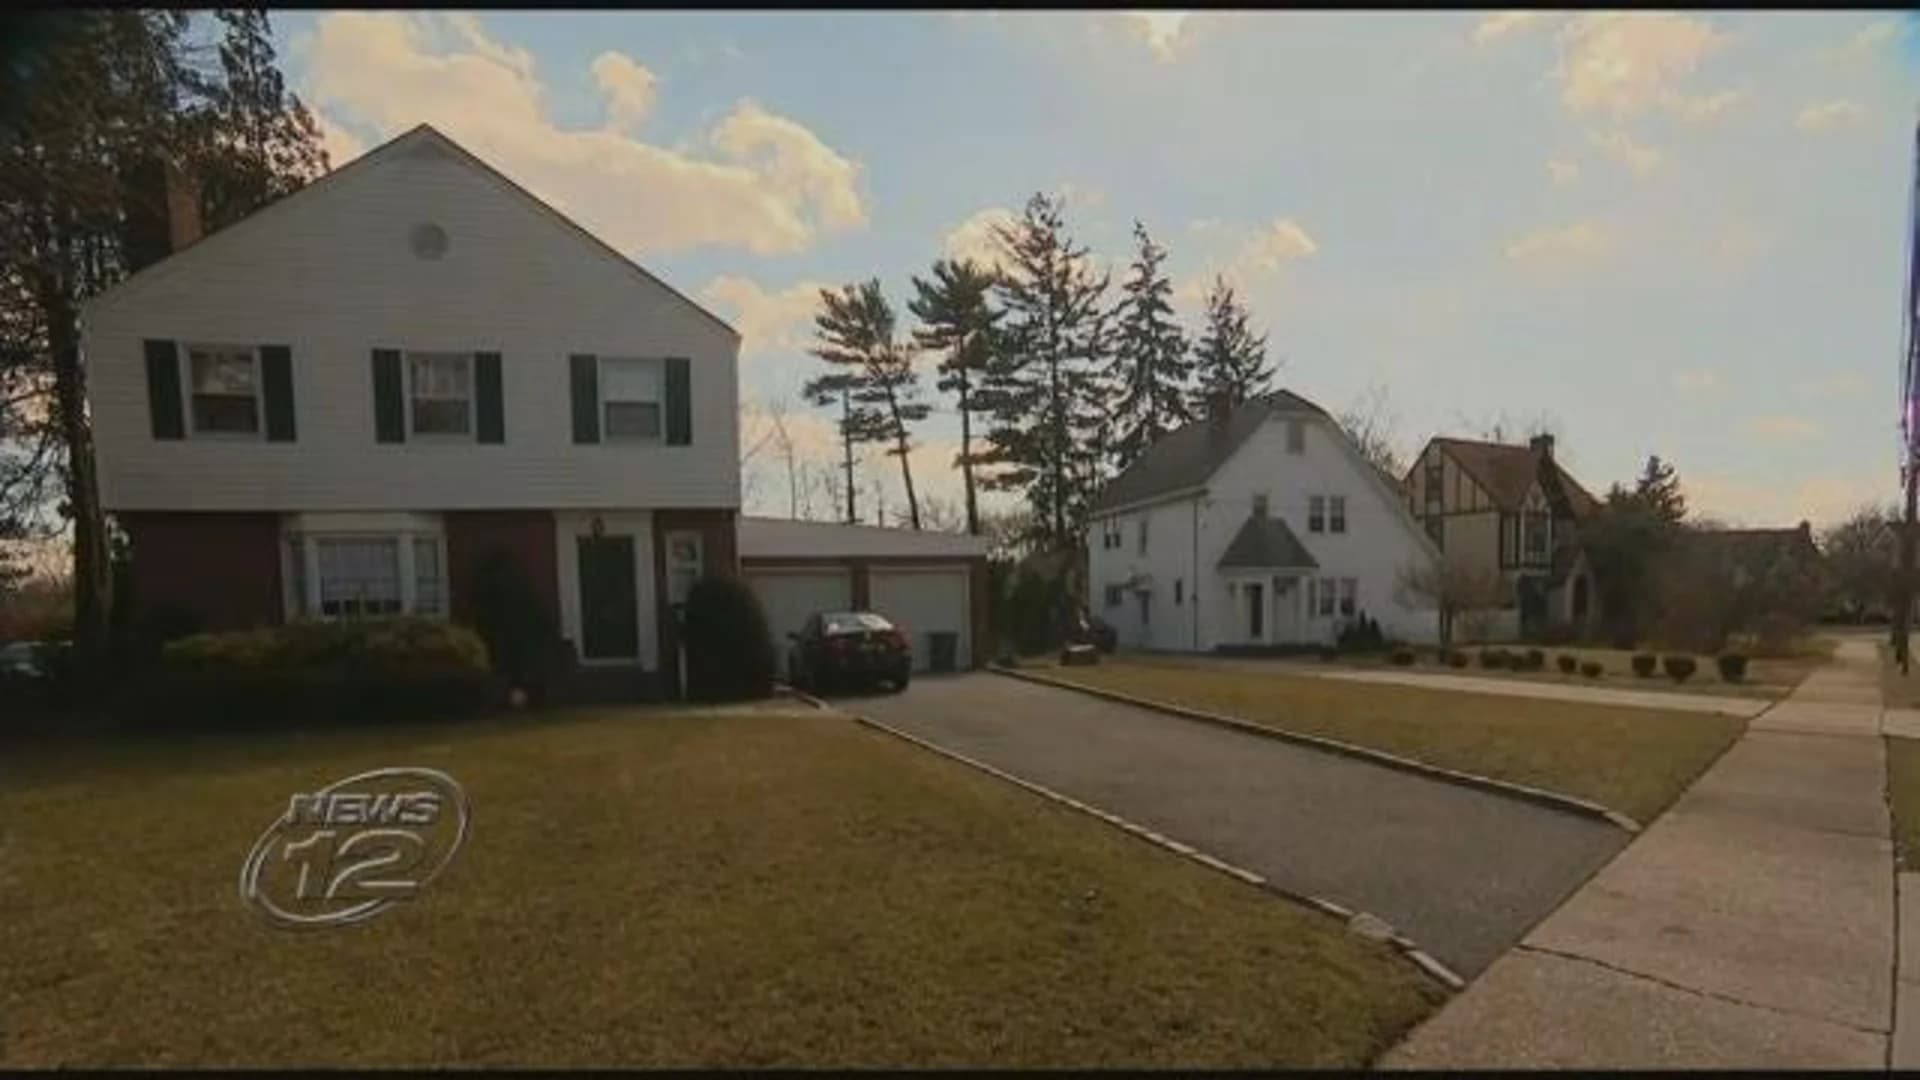 Nassau to reassess home values using new system